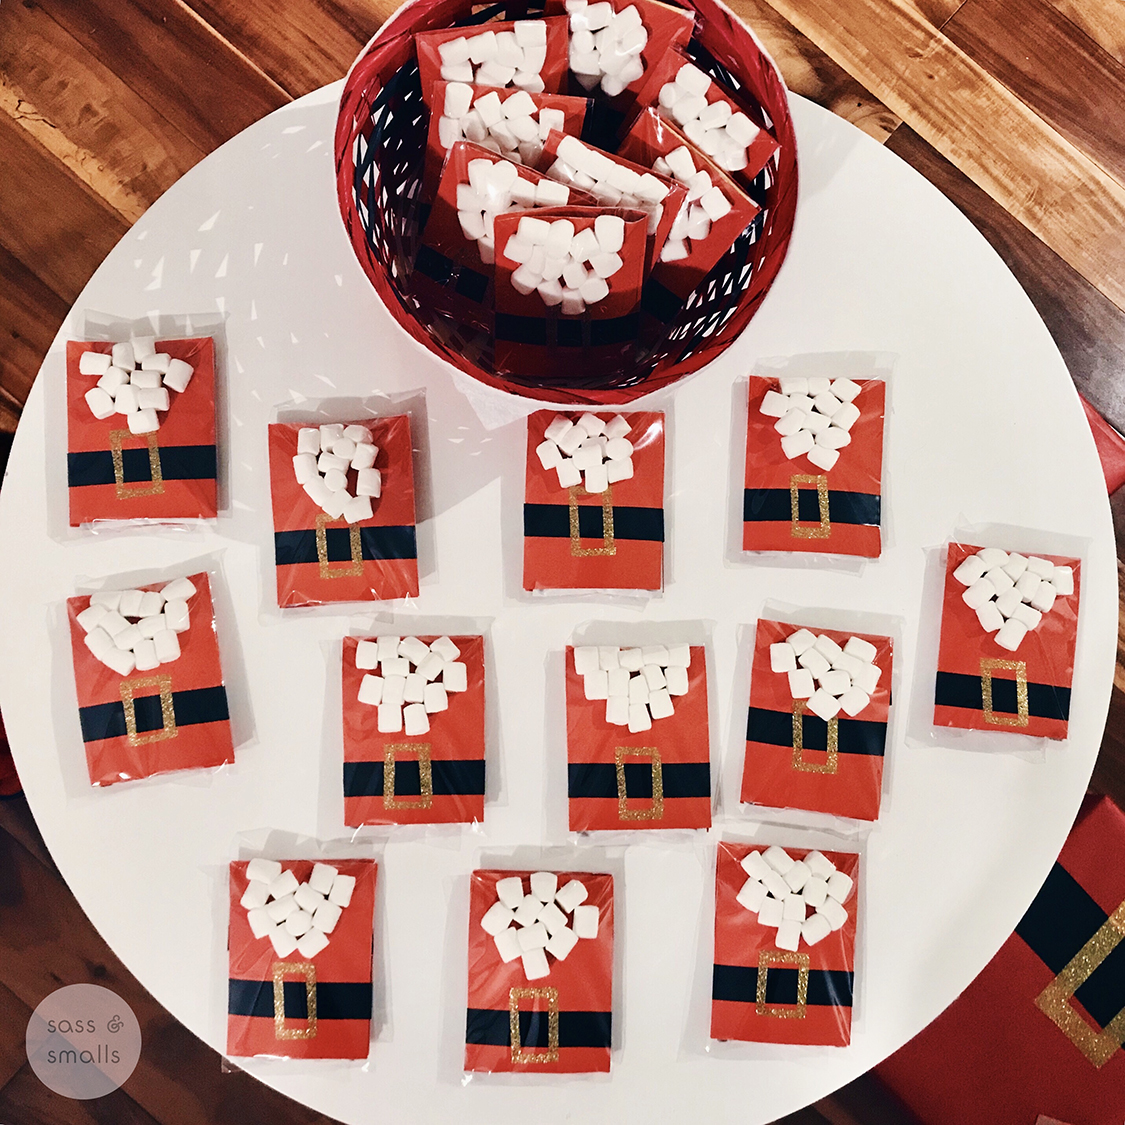 Santa Claus Theme Treats for Christmas Delivery :: The Gift of Giving www.sassandsmalls.com